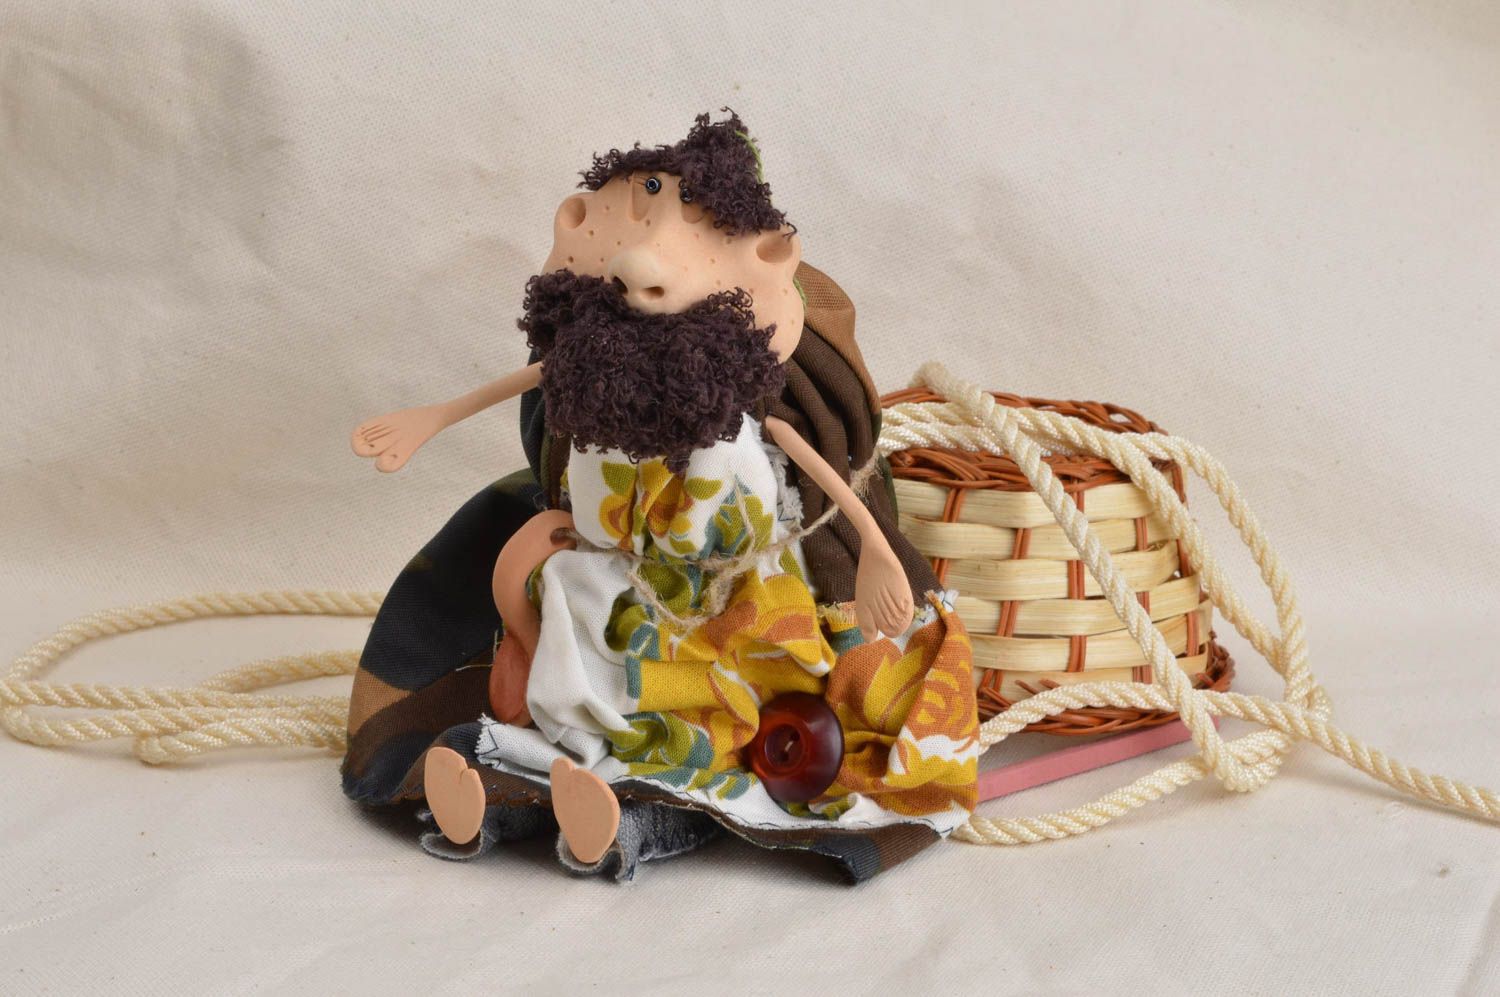 Handmade stylish unusual designer toy for decor made of clay and fabric photo 1